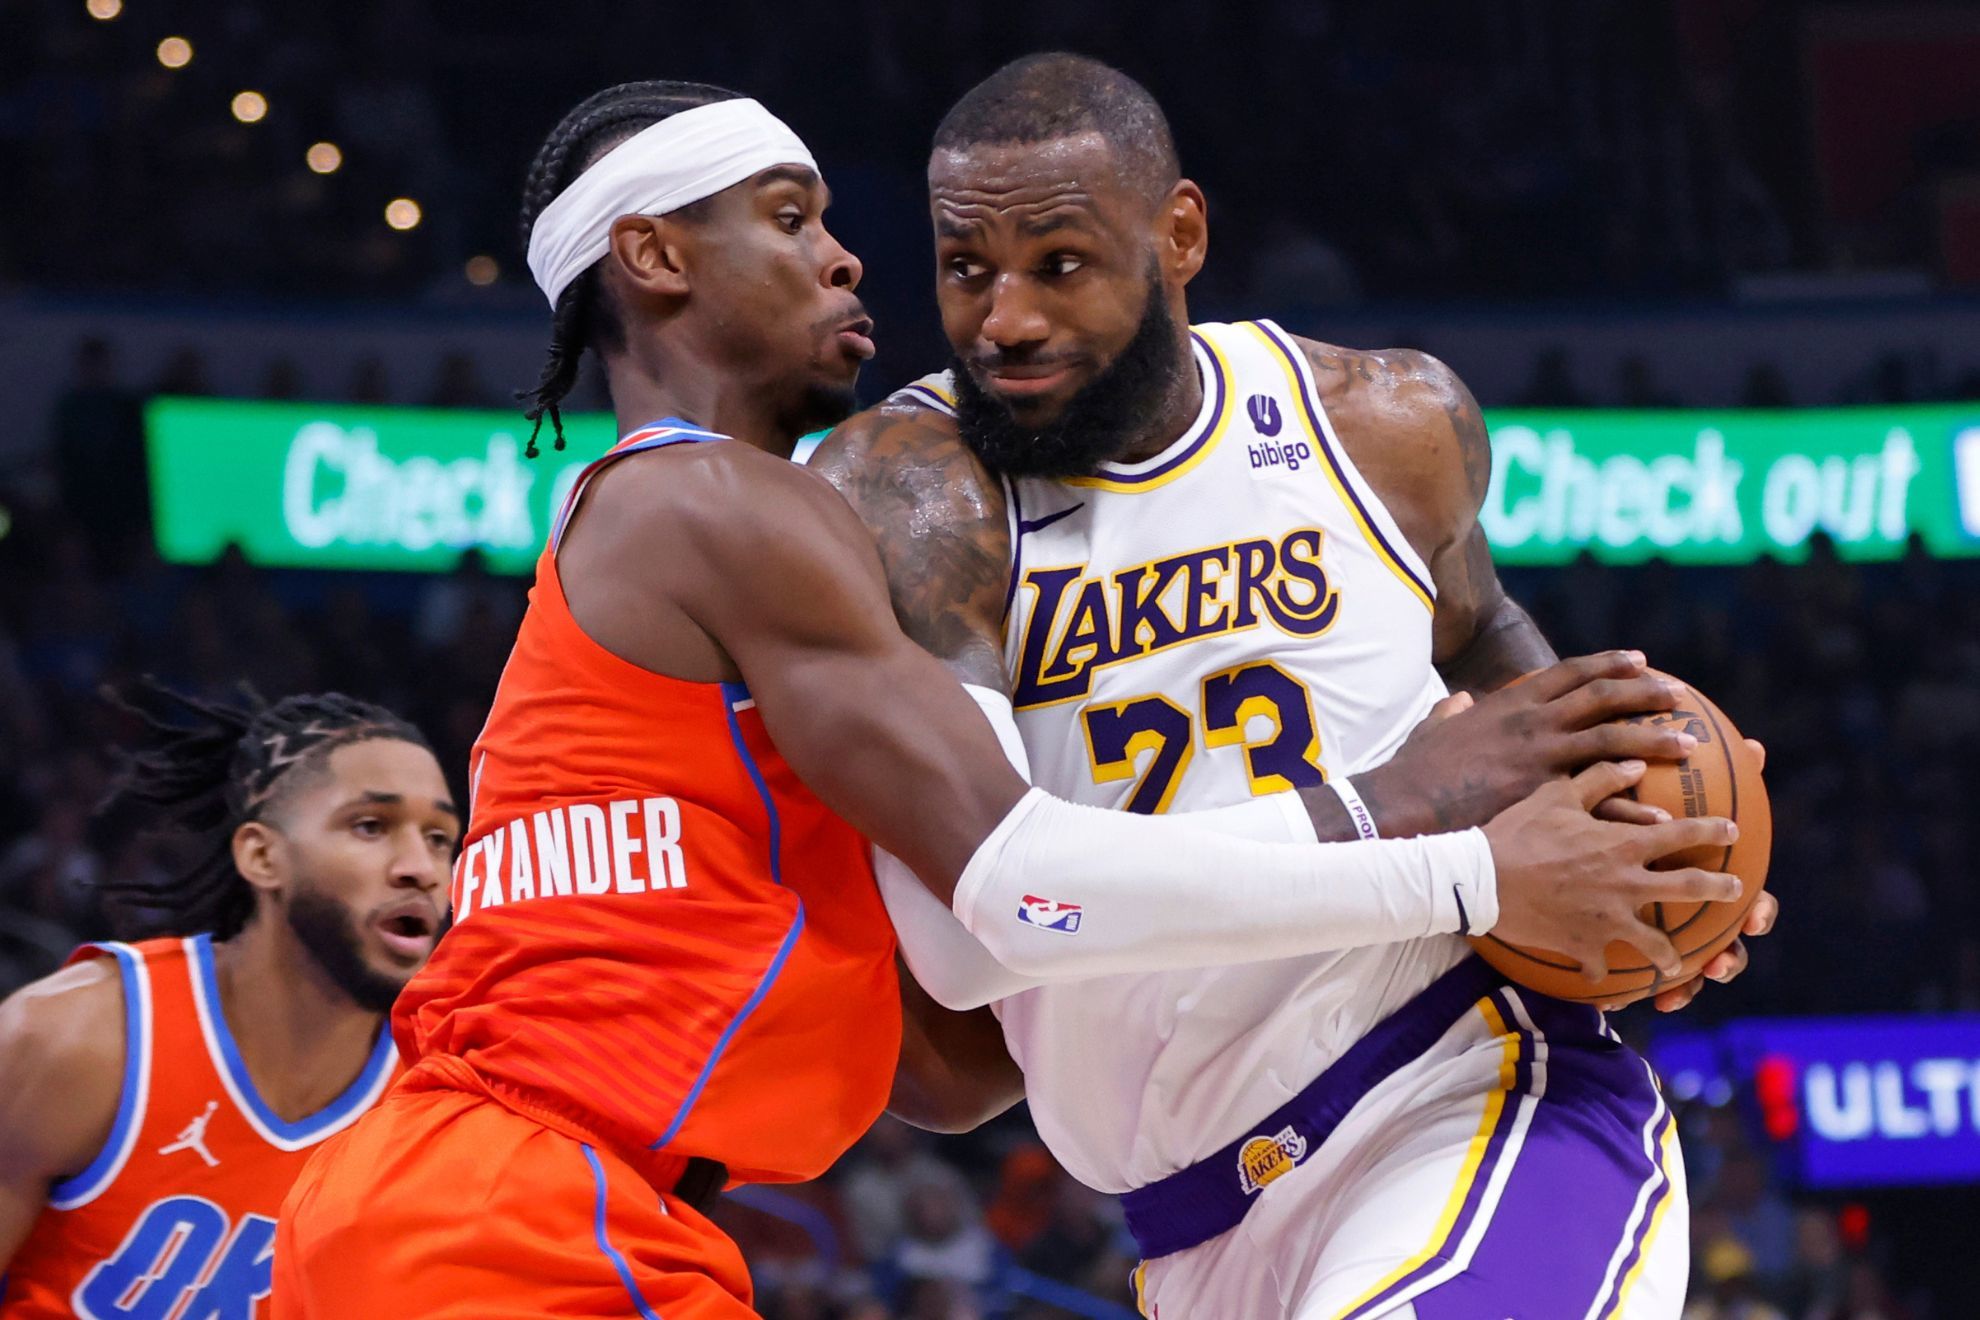 LeBron James admits Lakers are in desperate times after scoring 40 to snap skid